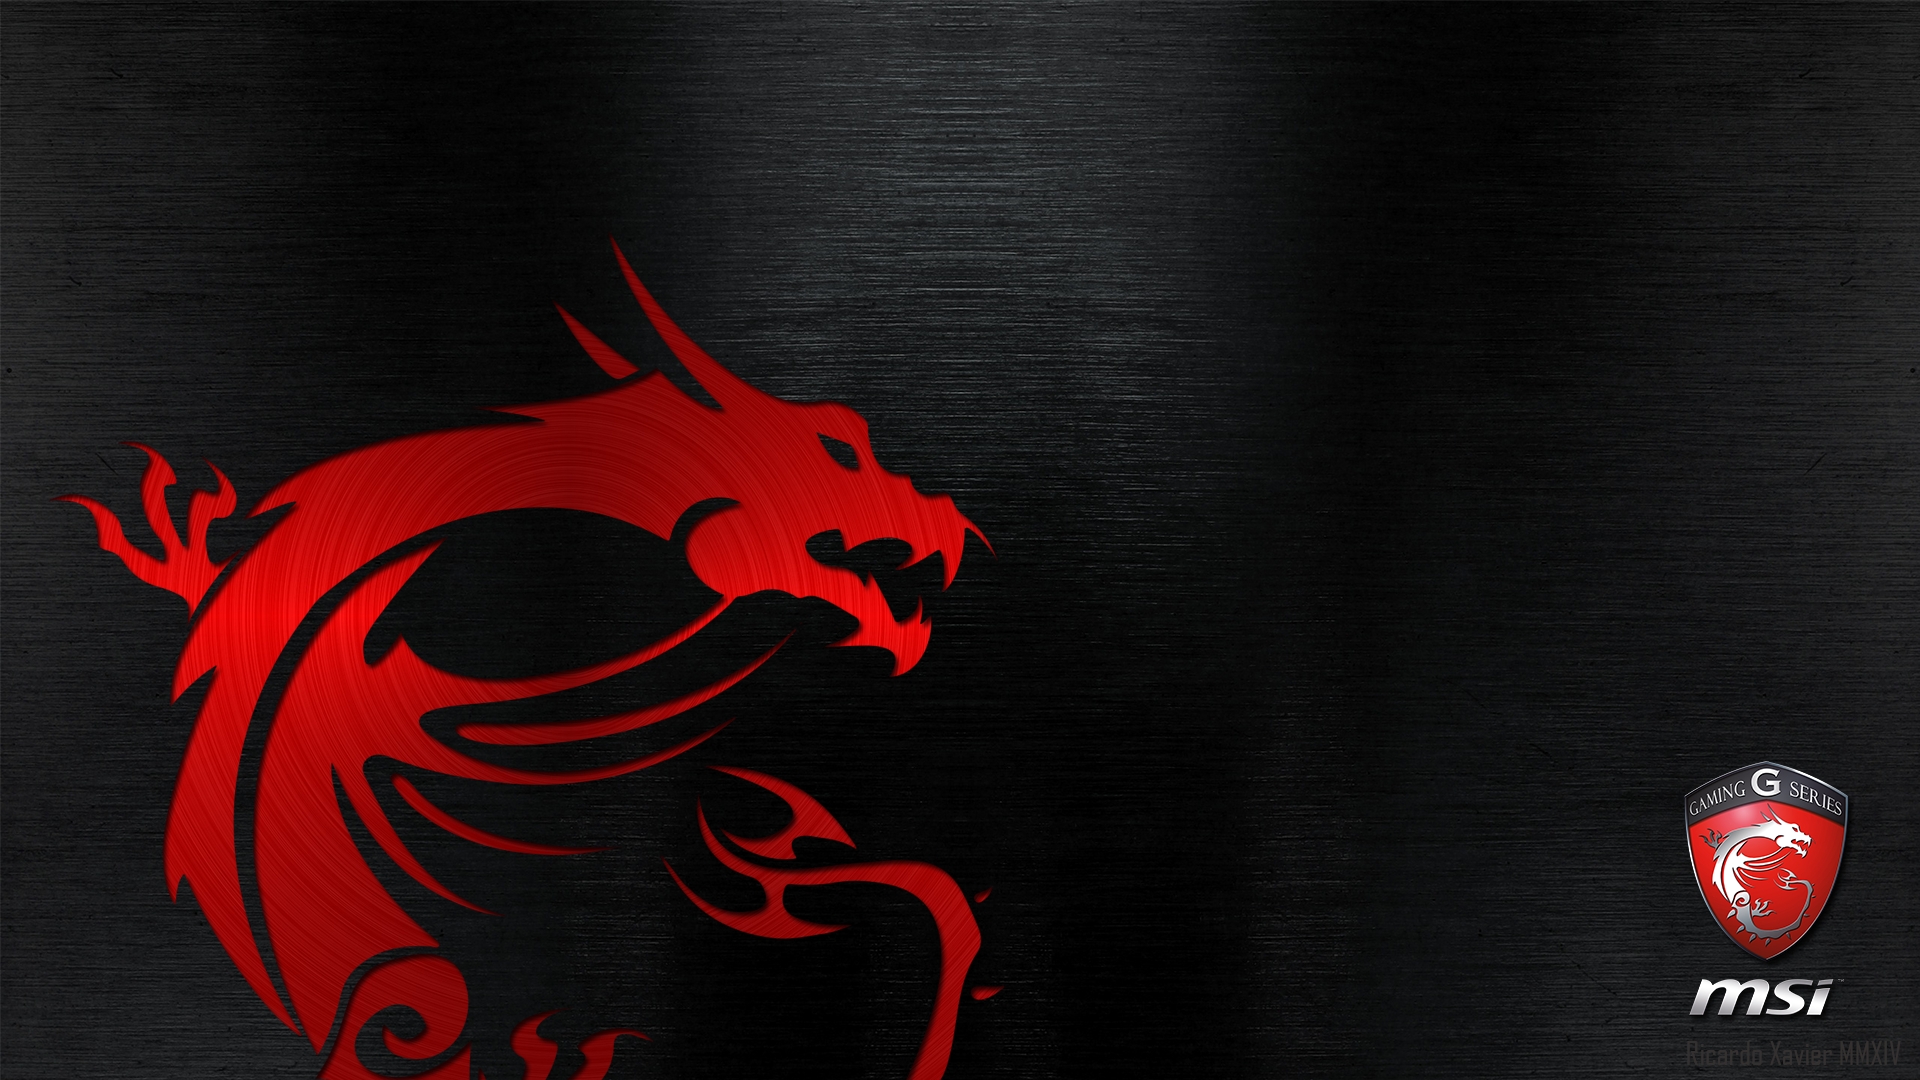 10 Most Popular Msi Gaming Series Wallpaper FULL HD 1080p For PC Background